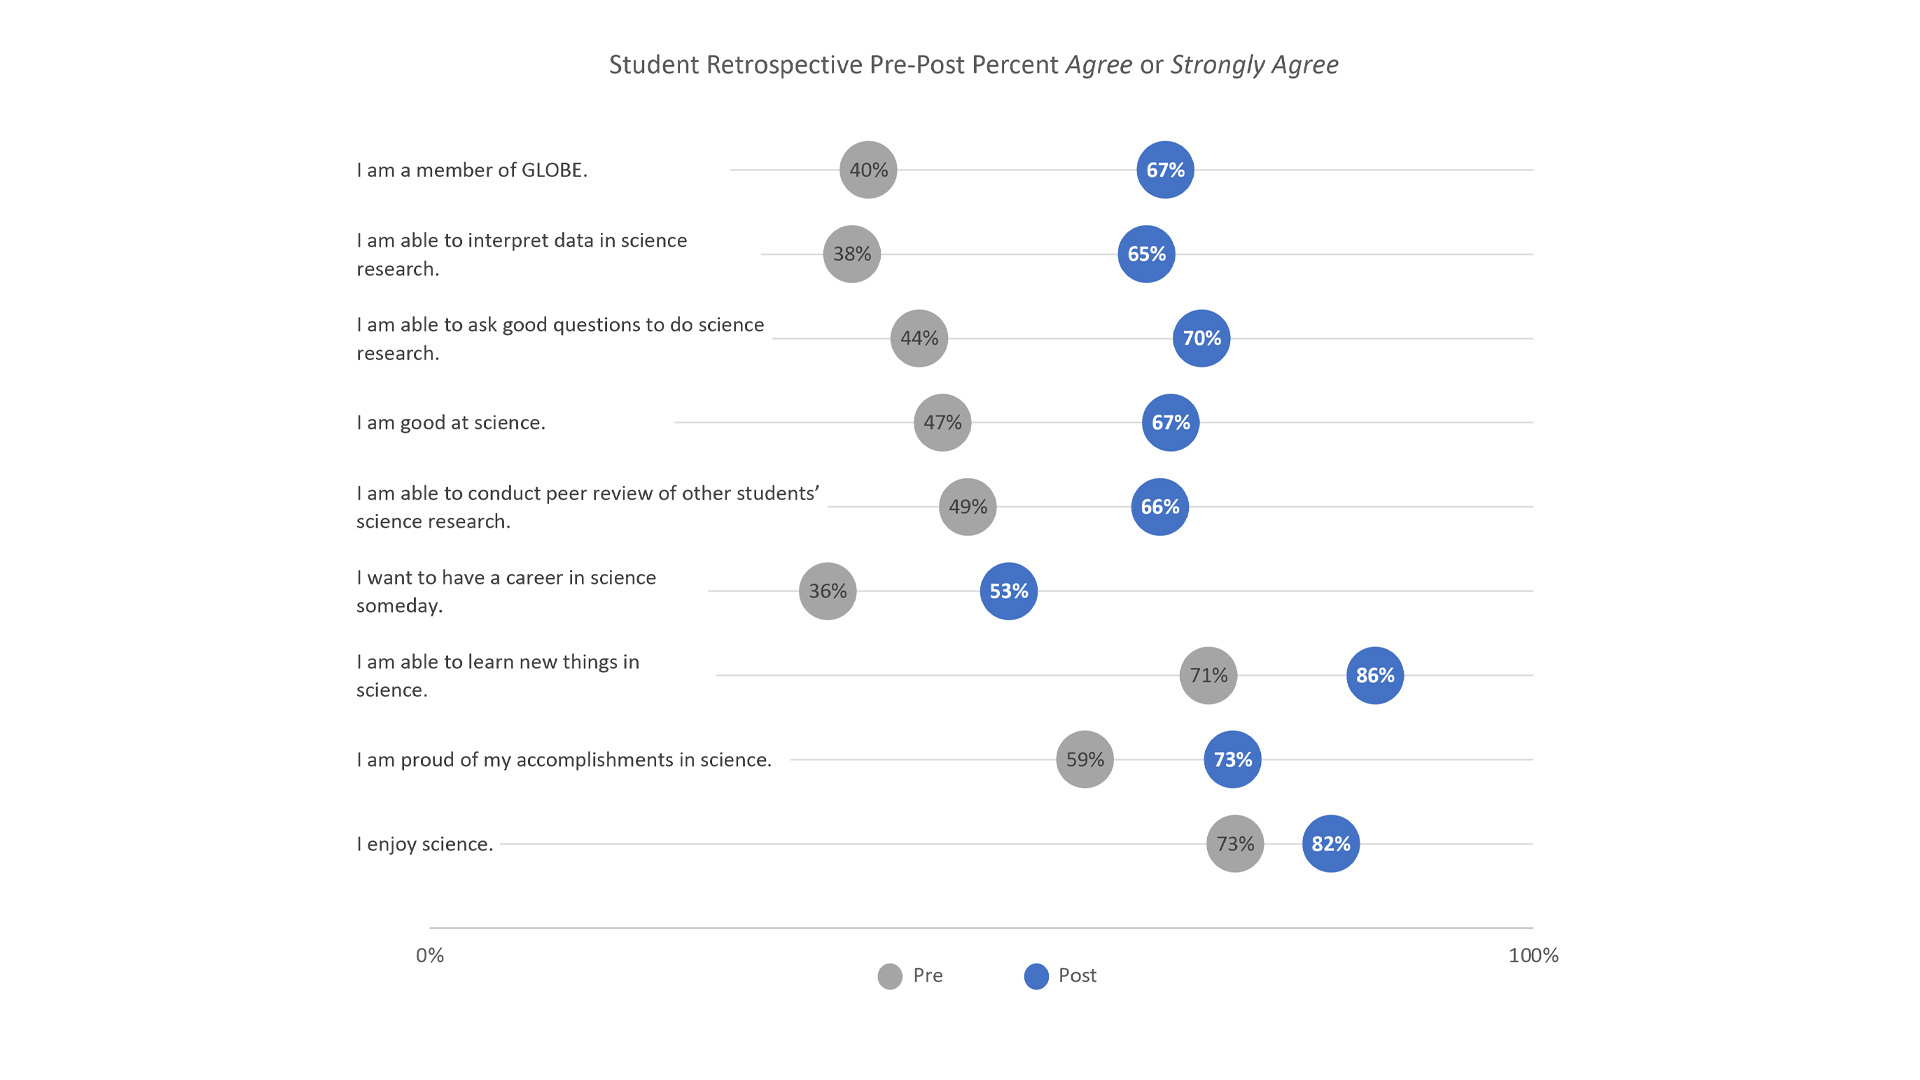 Figure 1. Percentage of students agreeing or strongly agreeing with statements about their science interest and self-efficacy and their GLOBE affiliation before and after the events in descending order of pre-post difference (n = 164).